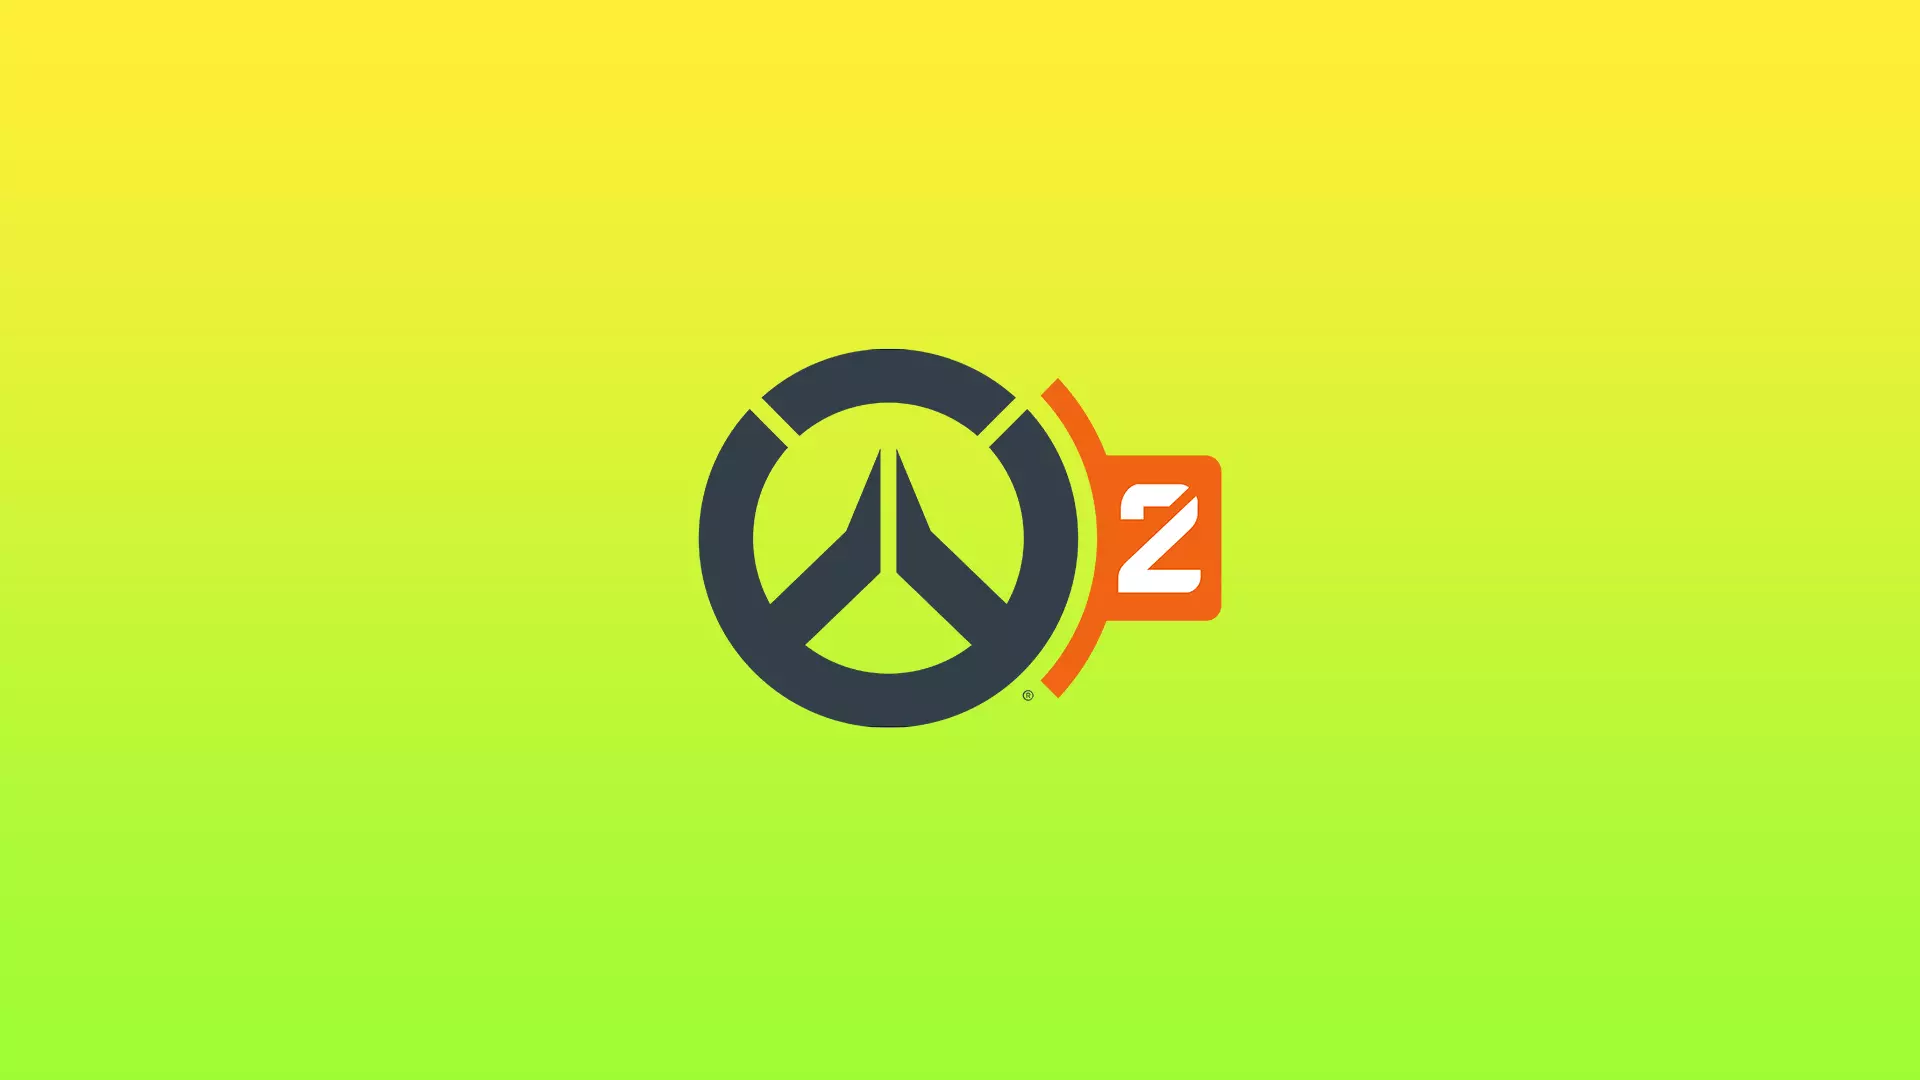 Overwatch 2 is out in early access